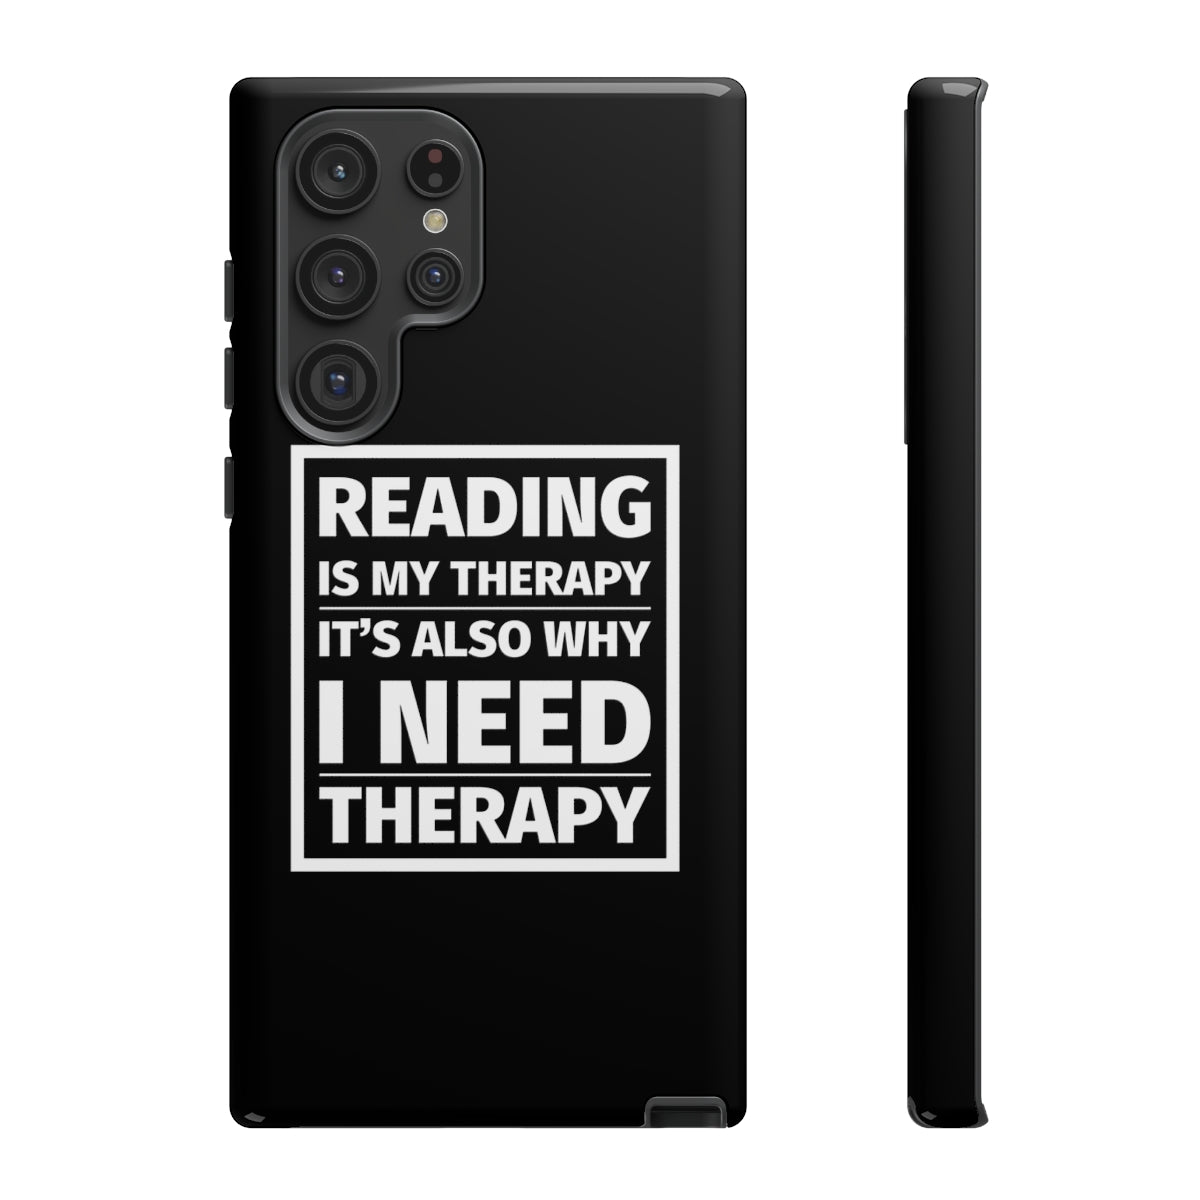 READING IS MY THERAPY Phone Case - Literary Lifestyle Company